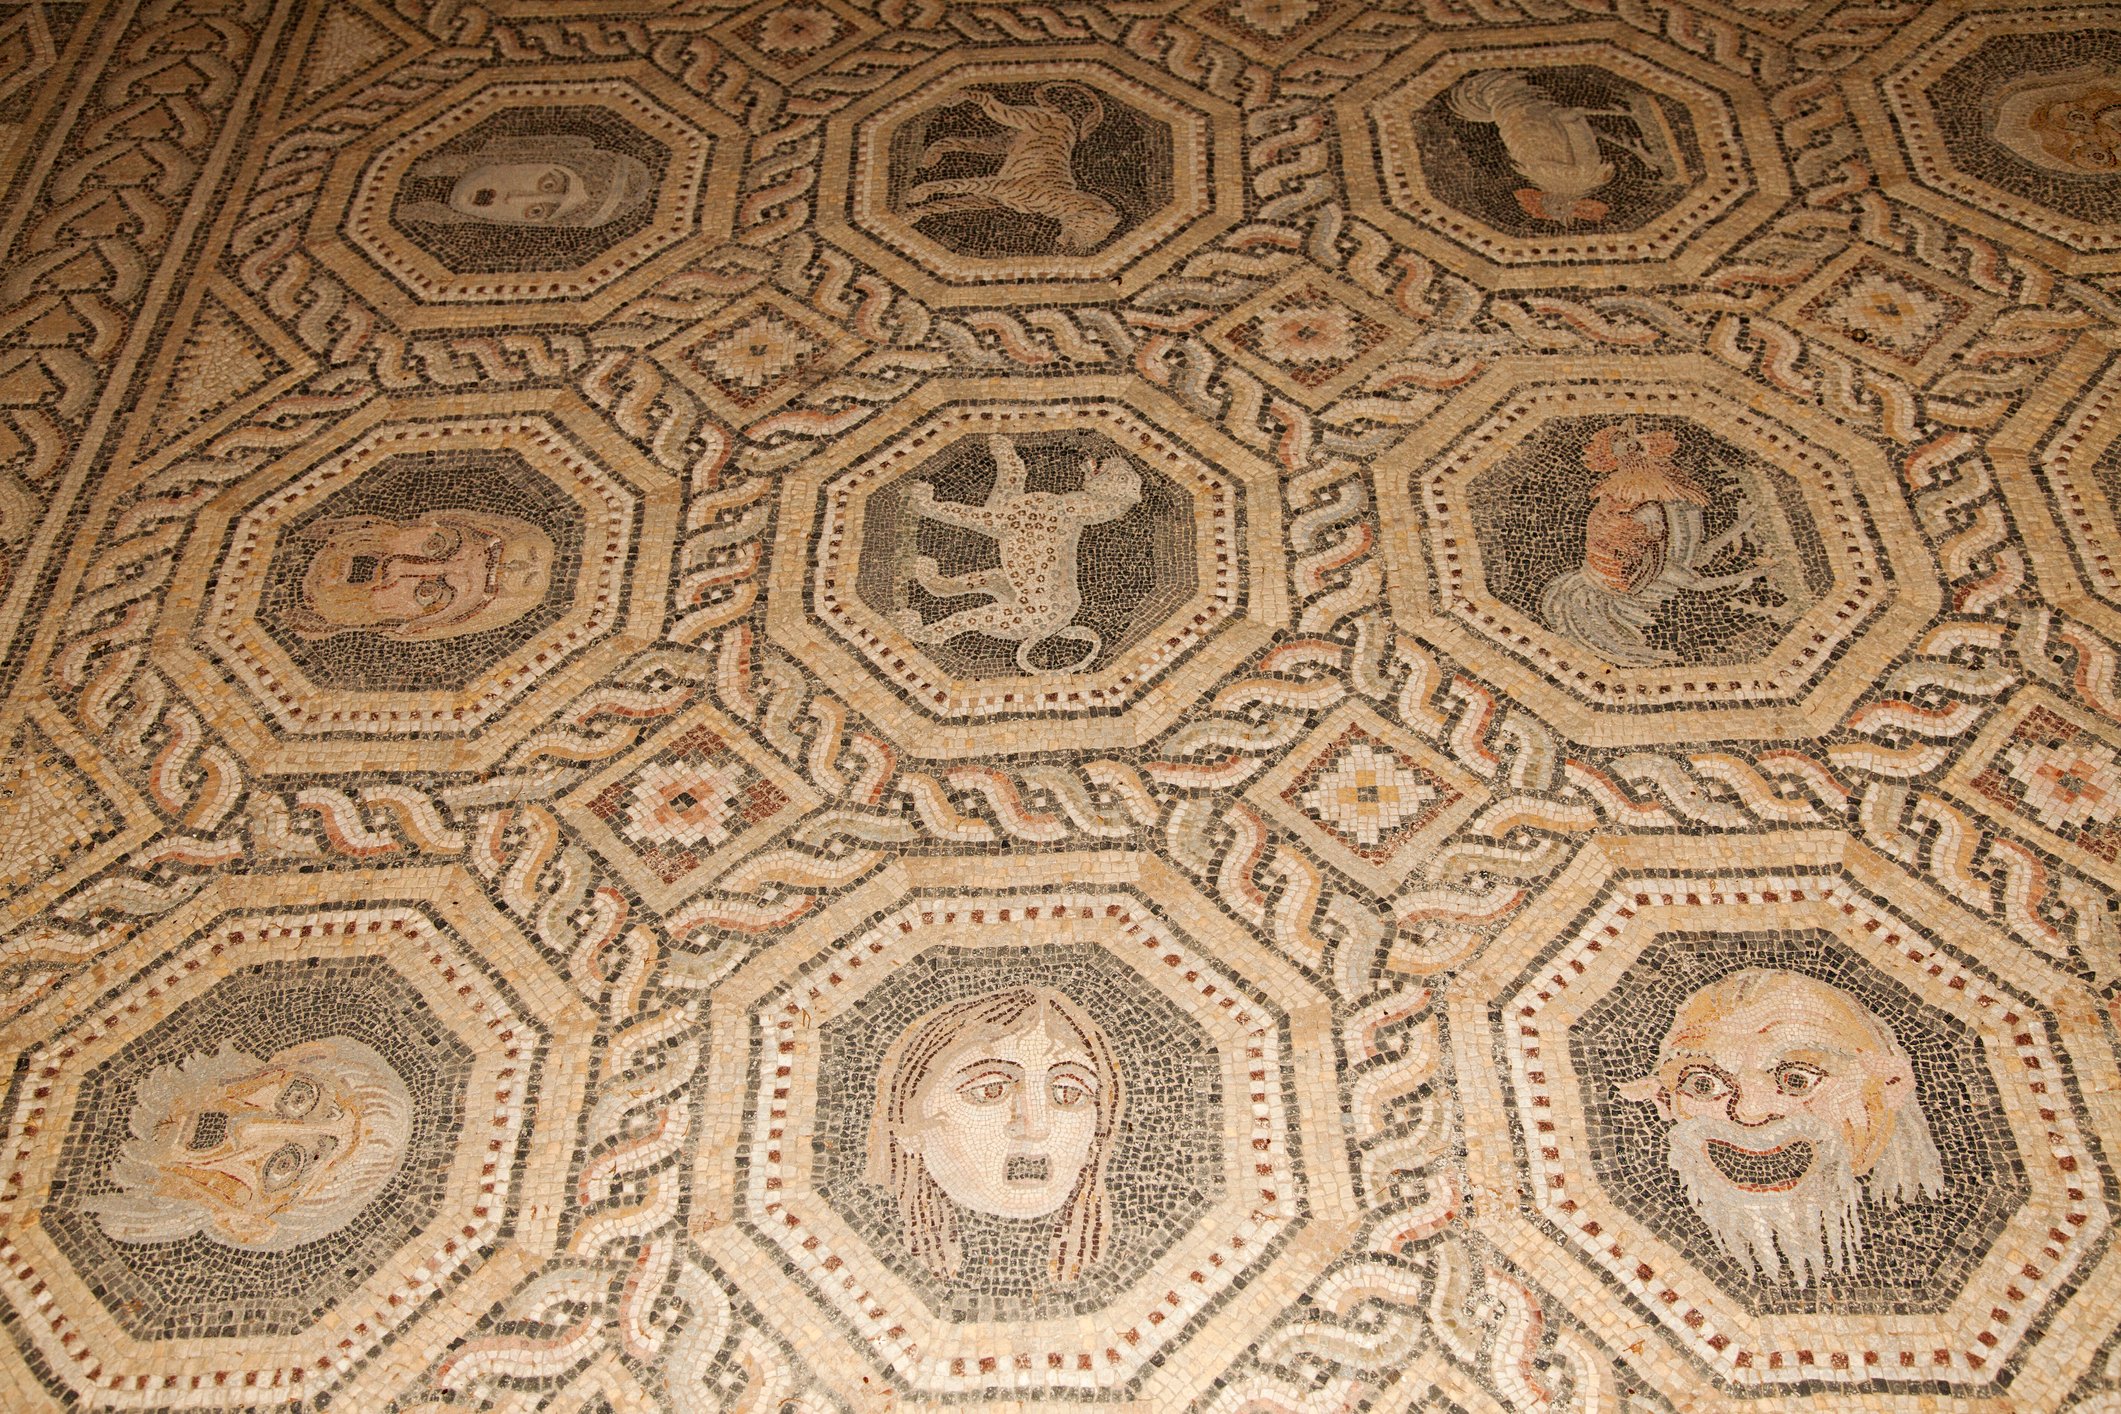 You can see many ancient floor mosaics at the Pergamon museum. (iStock Photo)